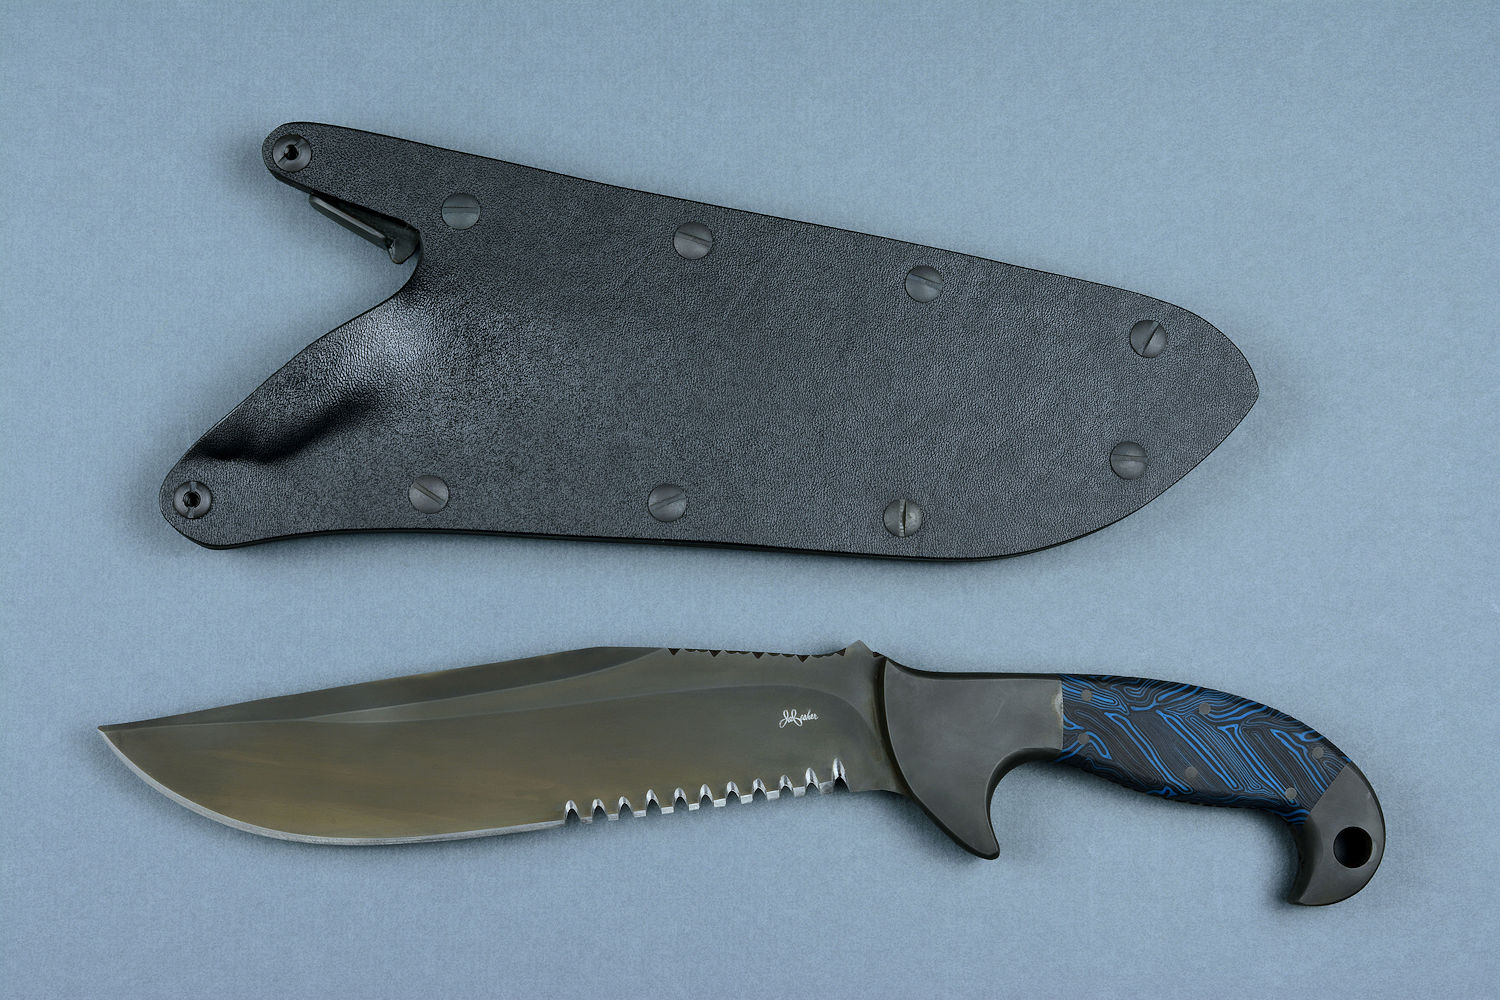 "Utamu" Custom Crossover, Survival, Tactial knife, obverse side view in T4 cryogenically treated CPM 154CM powder metal high molybdenum martensitic stainless steel blade, 304 stainless steel bolsters, blue/black G10 compos000ite handle, positively locking sheath of kydex, anodized aluminum, black oxide stainless steel, anodized titanium